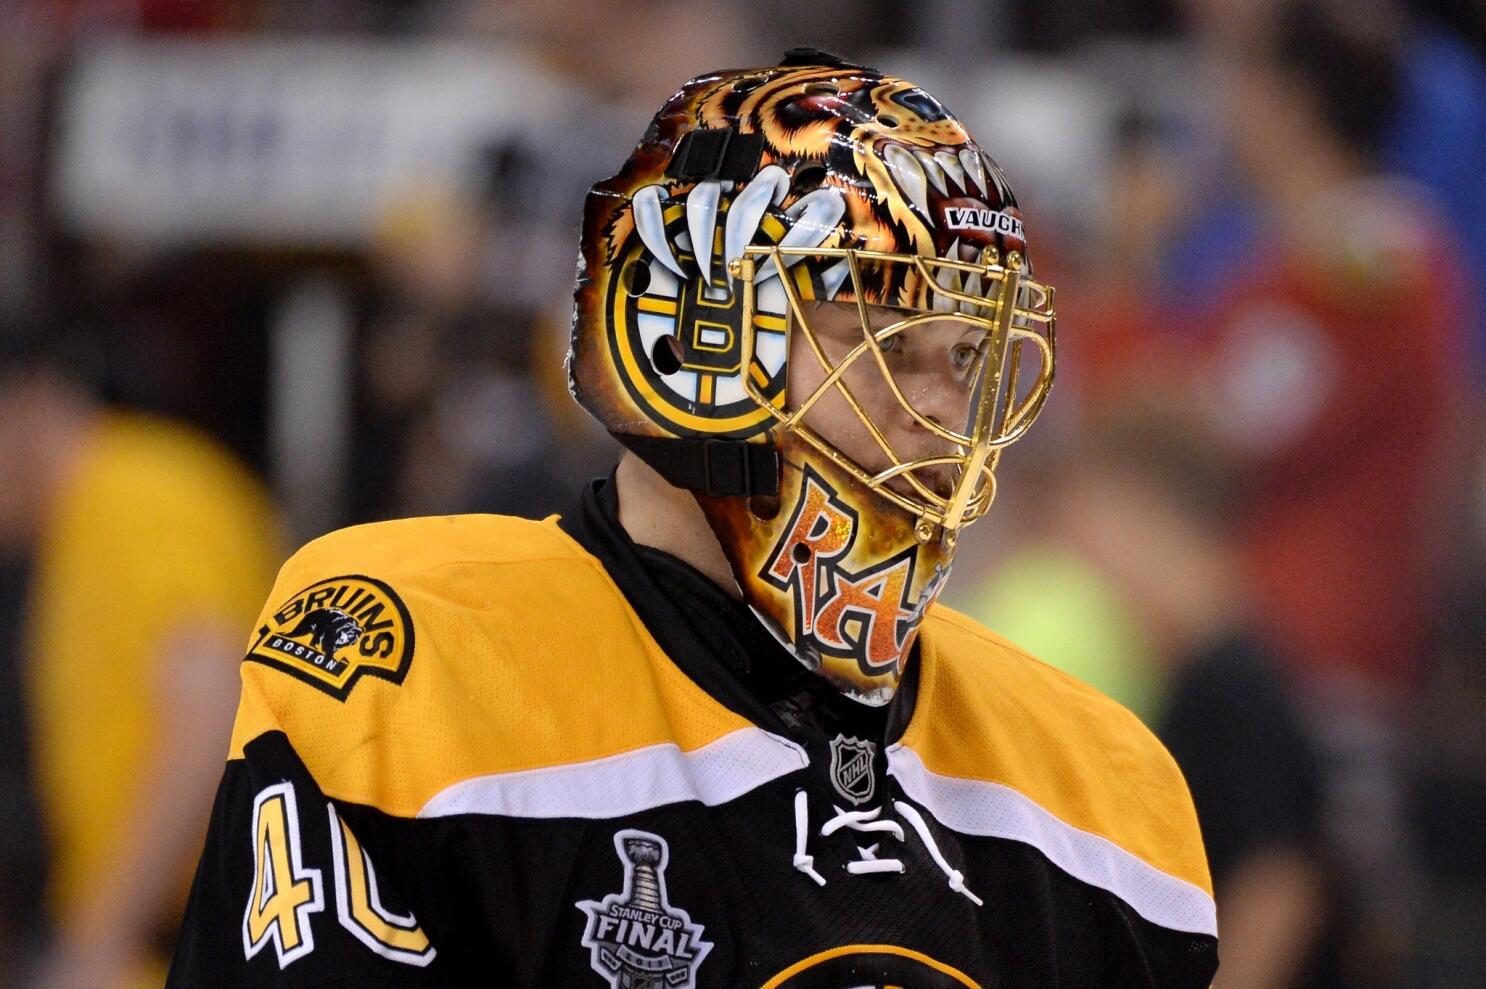 Tuukka Rask signs AHL tryout contract with Providence Bruins